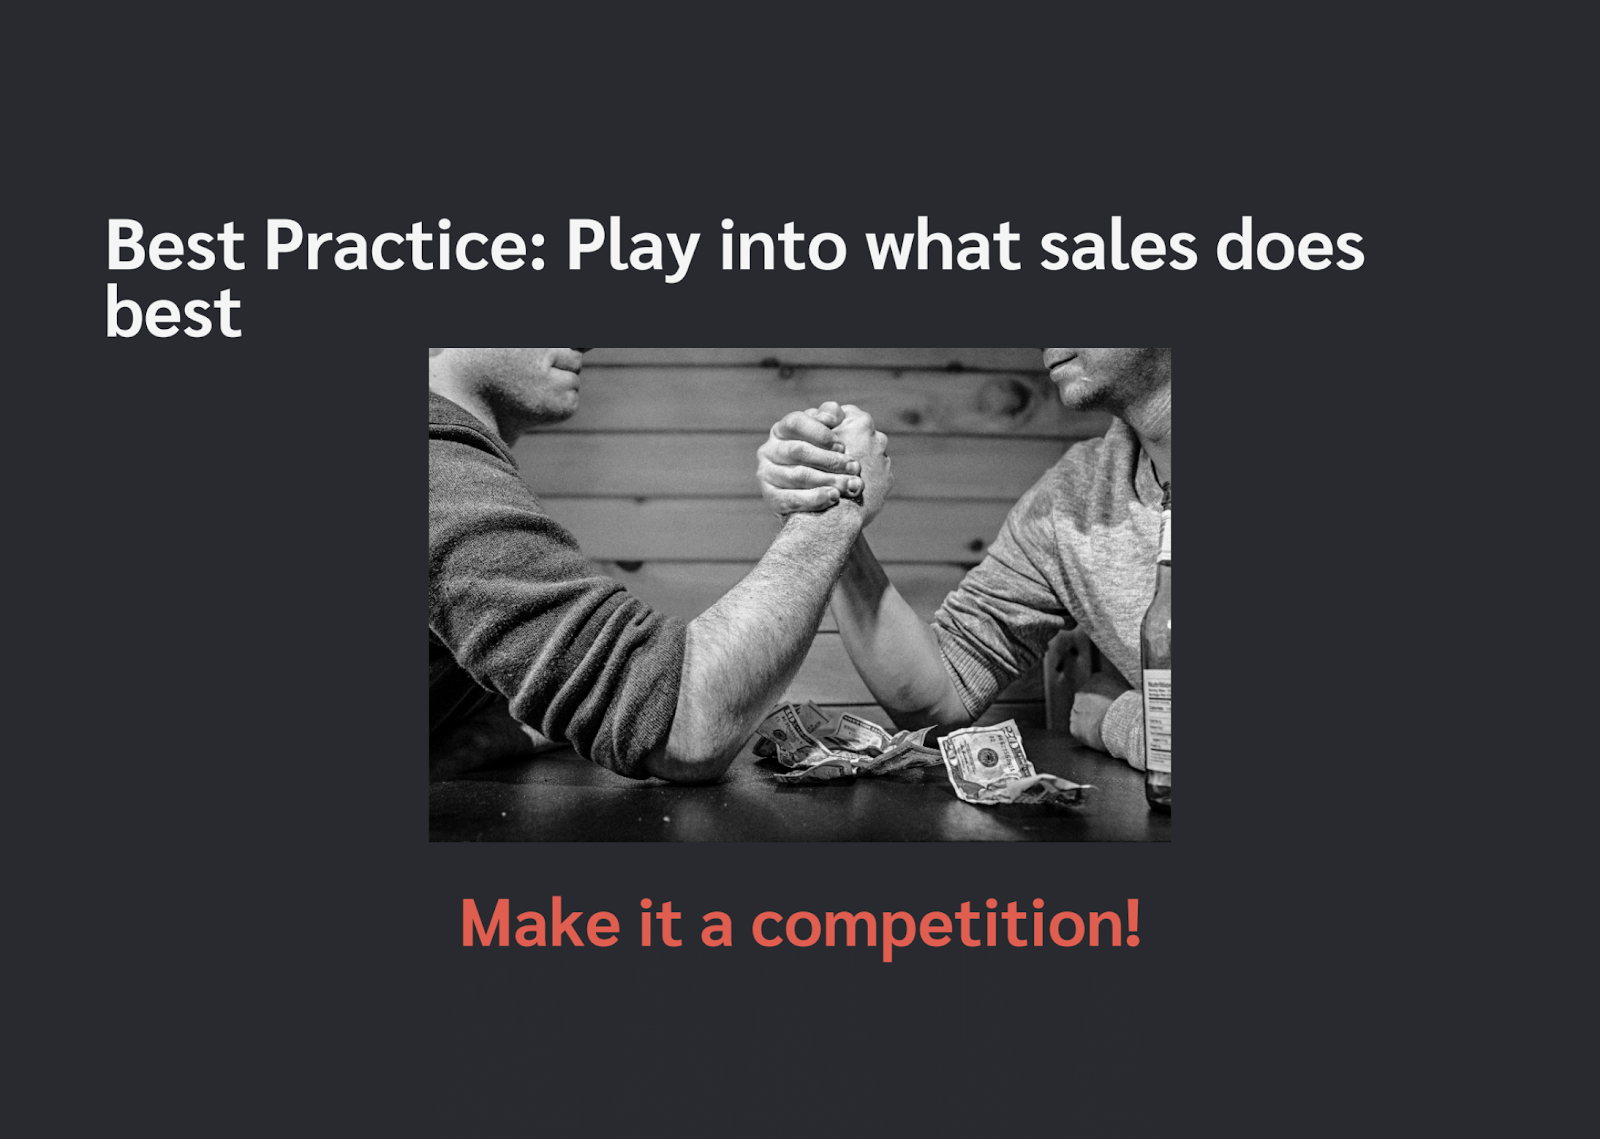 Use gamification methods and make sales a competition to optimize performance.